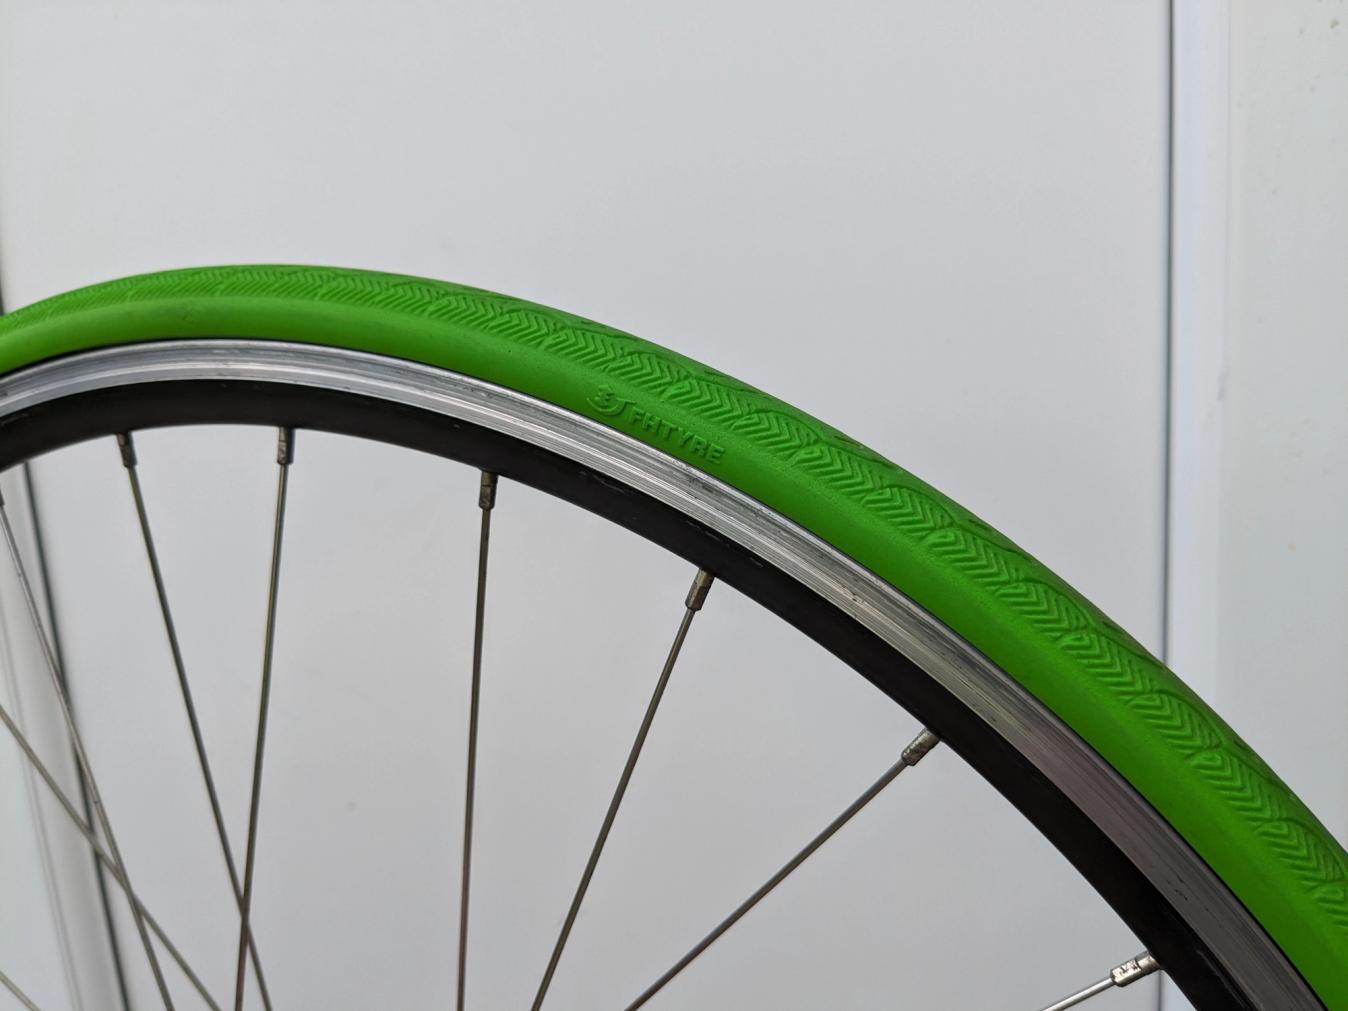 Puncture-proof tyres, as the name suggests, can't puncture.